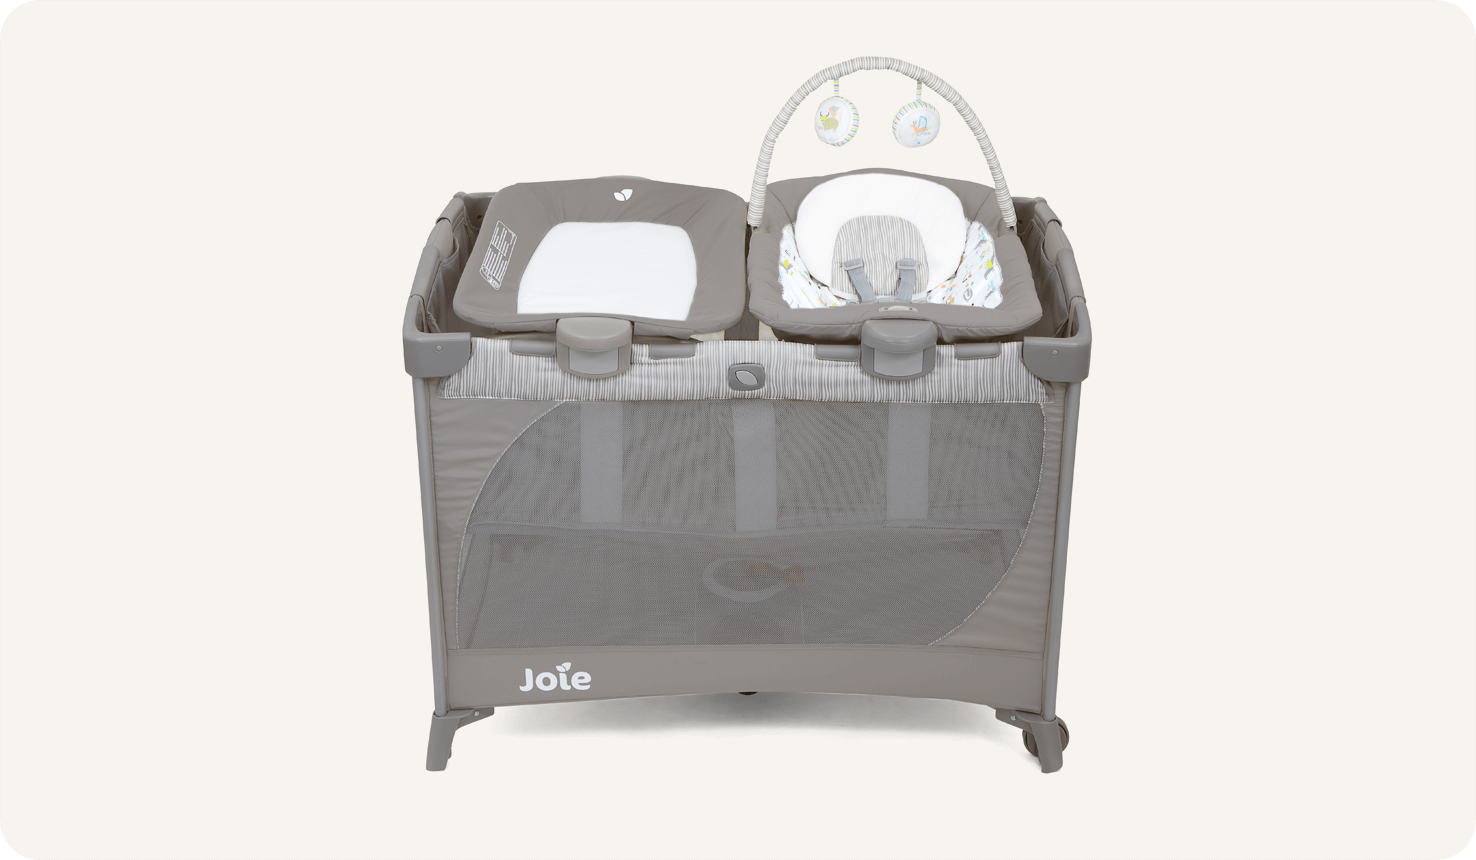 Joie travel cot commuter change & bouncer in grey with bassinet, changer, and bouncer seat at a high side profile.